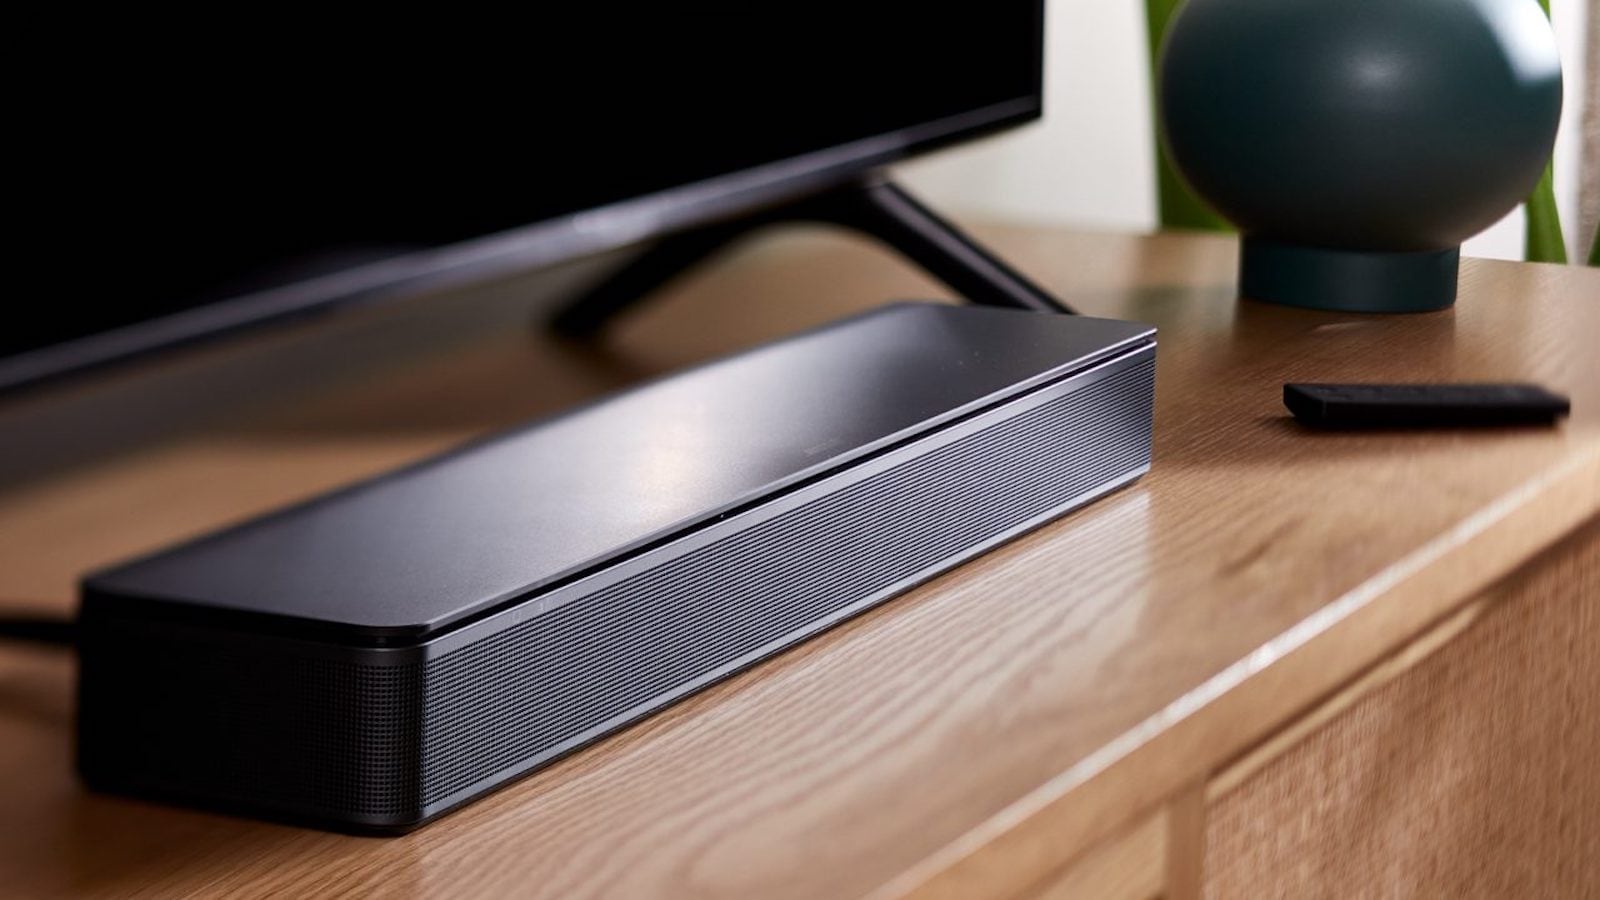 Bose TV Speaker media sound system sets up in just one step and